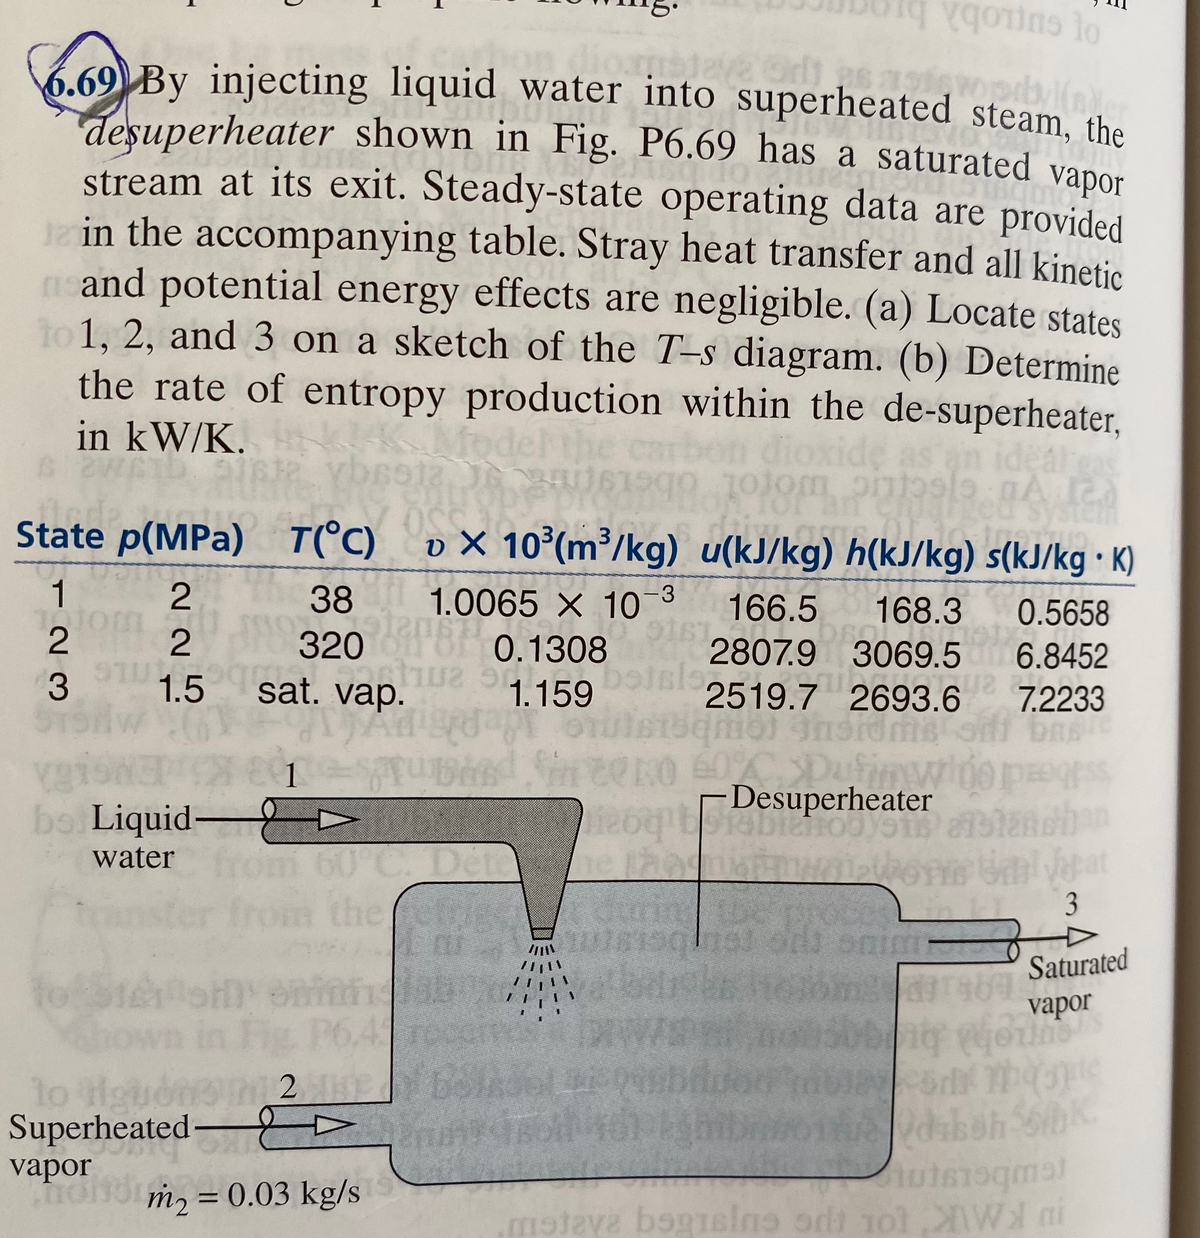 ygotins lo
6.69) By injecting liquid water into superheated steam. the
desuperheater shown in Fig. P6.69 has a saturated vapor
stream at its exit. Steady-state operating data are provided
in the accompanying table. Stray heat transfer and all kinetic
neand potential energy effects are negligible. (a) Locate states
to 1, 2, and 3 on a sketch of the T-s diagram. (b) Determine
the rate of entropy production within the de-superheater,
K.Modelthe
in kW/K.
ideal as
State p(MPa) T°C)
) v × 10³(m³/kg) u(kJ/kg) h(kJ/kg) s(kJ/kg · K)
1
38
1.0065 X 10-3
166.5
168.3
0.5658
1B 0.1308
320
sat. vap.
Y2807.9 3069.5
6.8452
3
1.5
1.159
2519.7 2693.6 7.2233
Desuperheater
bol Liquid
बेे कत
60°C. Det
heet
ni
water
3.
Saturated
fos
vapor
P6.4recom
O
lo lguons 2
Superheated-
vapor
honor
m2 = 0.03 kg/s
motava bogisins odt 1ol,nW ni
